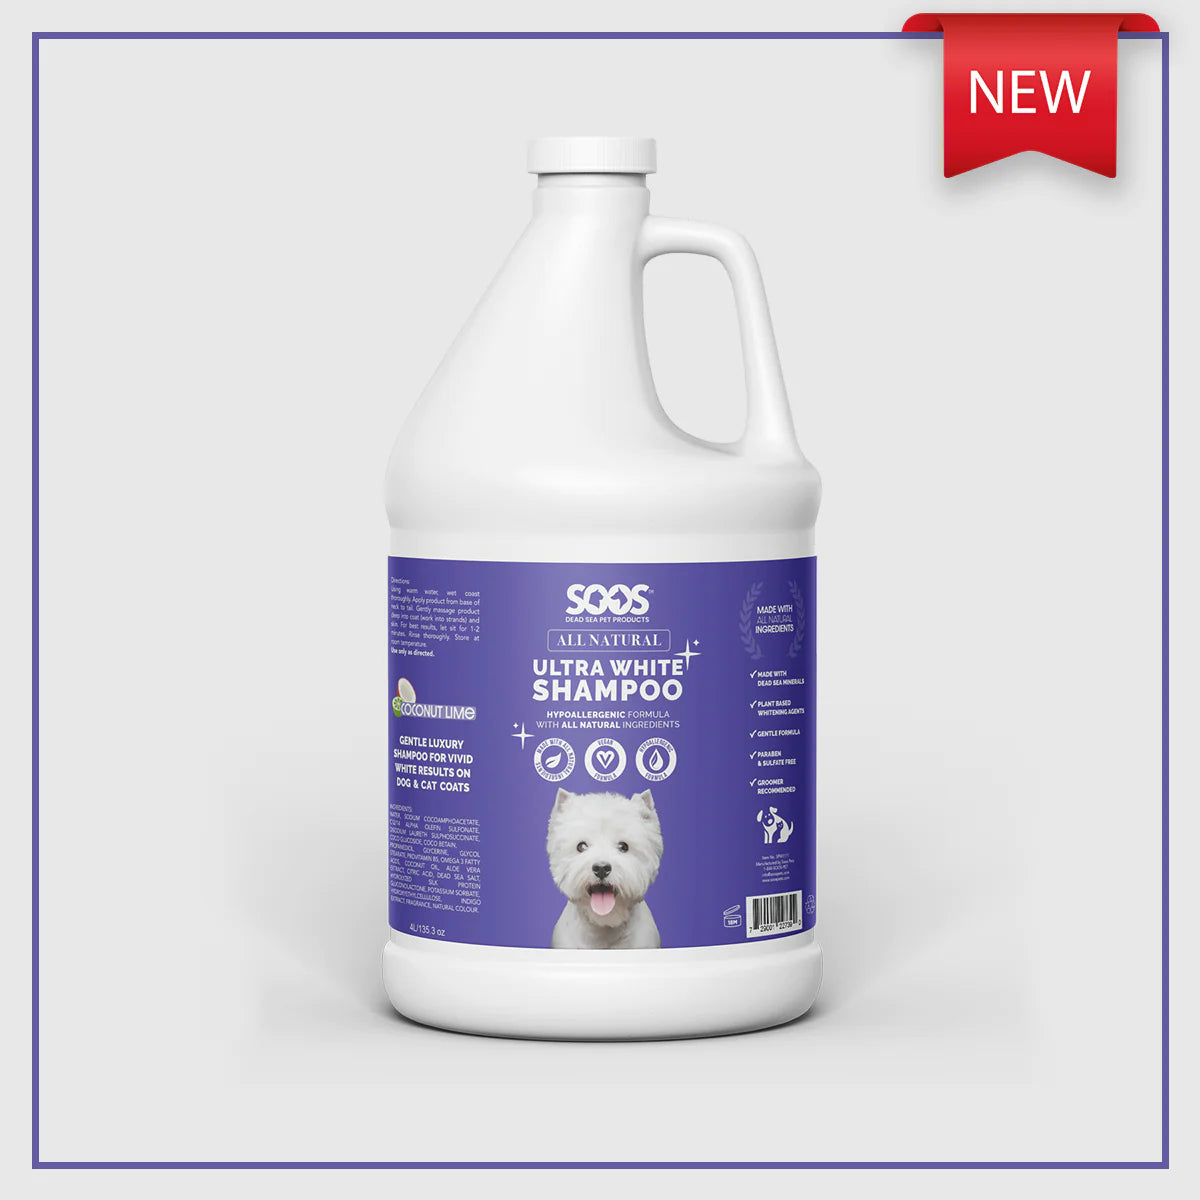 Soos™ Ultra White Hypoallergenic Pet Shampoo is a luxurious formulation of natural ingredients and plant-based whitening agents that gently cleanse and brighten your clients' coats without harsh chemicals. It soothes sensitive skin and allergies, while nourishing and moisturizing coats for a healthy, shiny look. 1.32 Gallon